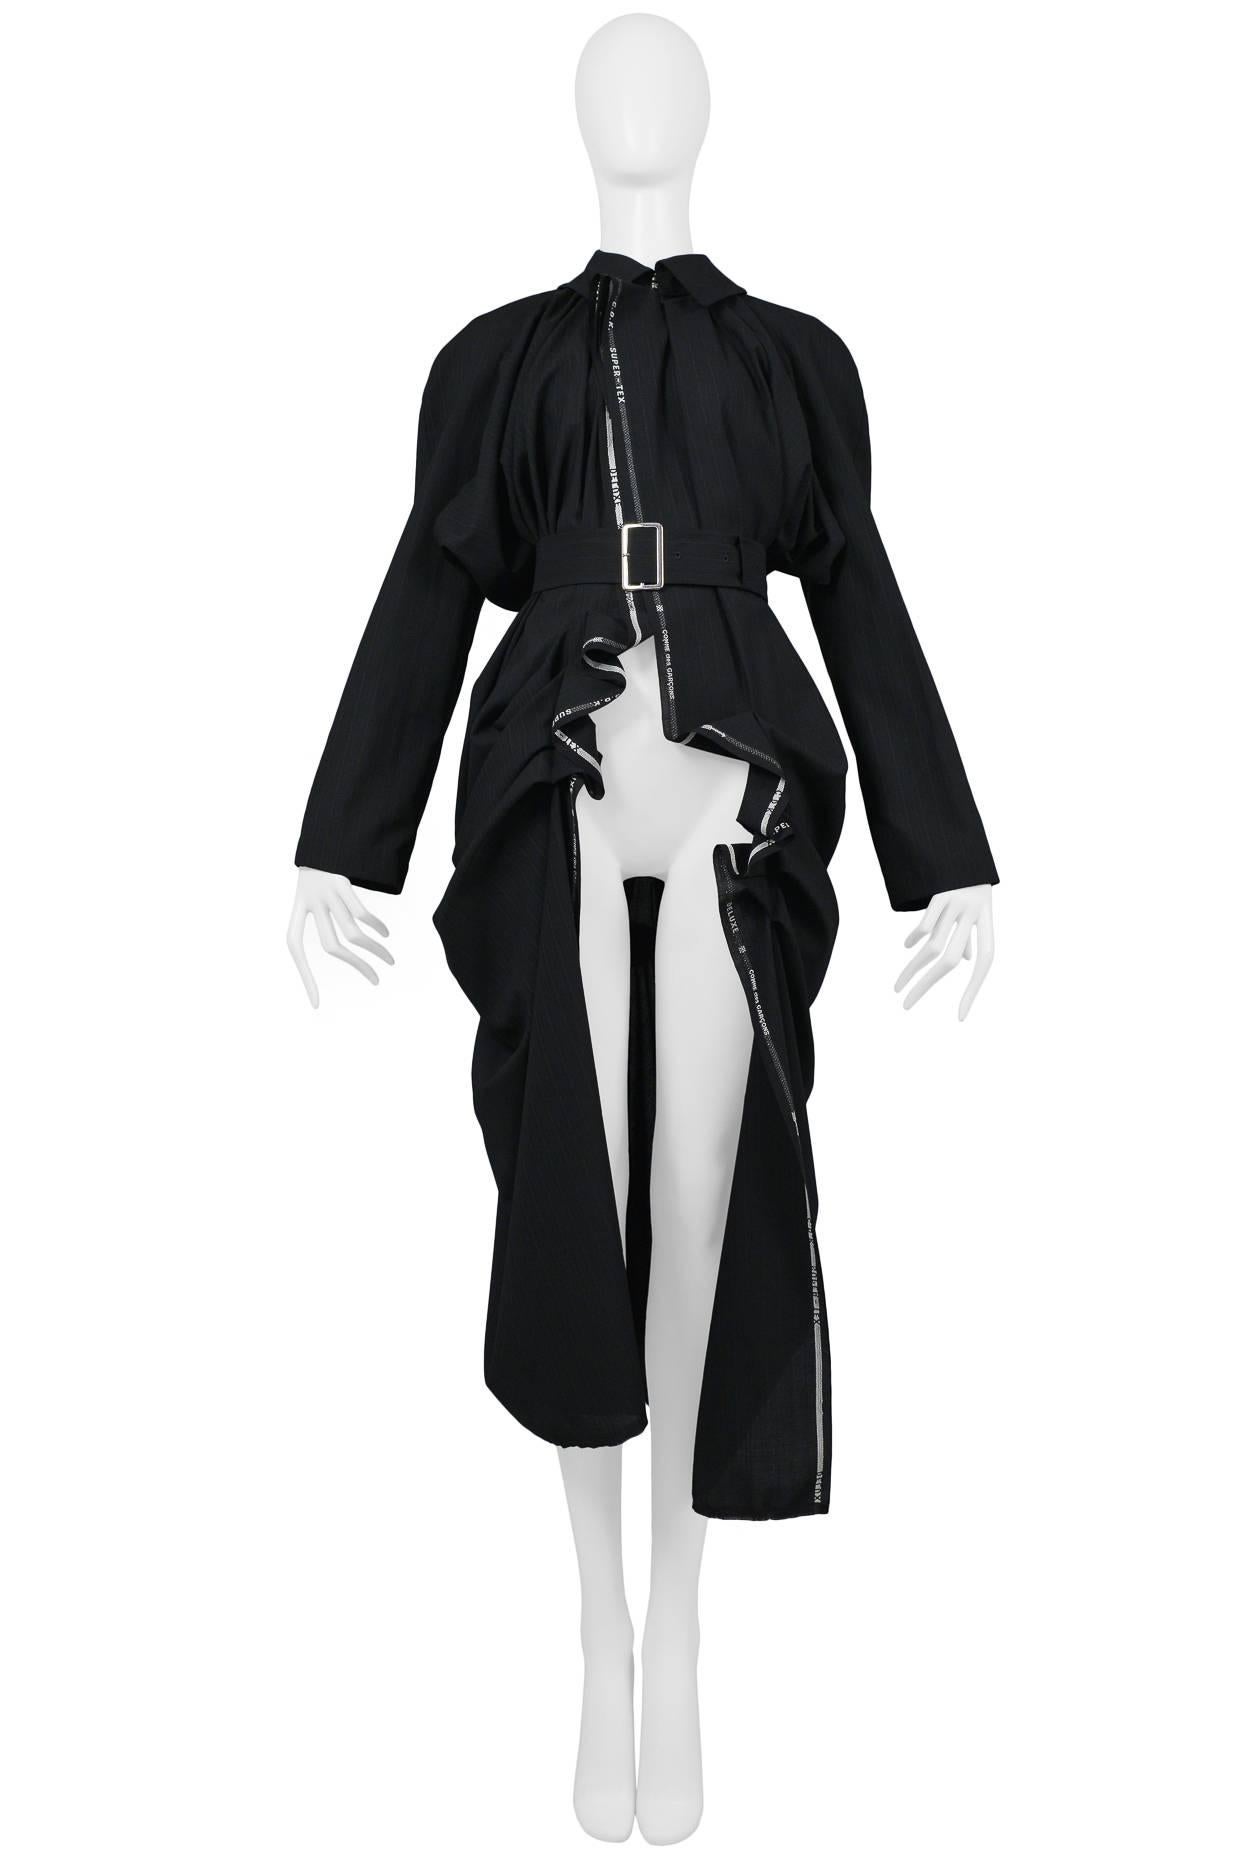 Comme des Garcons navy pinstripe coat features heavy draping, unattached belt, and exposed selvedge that reads "Comme des Garcons". Collection SS 2006.